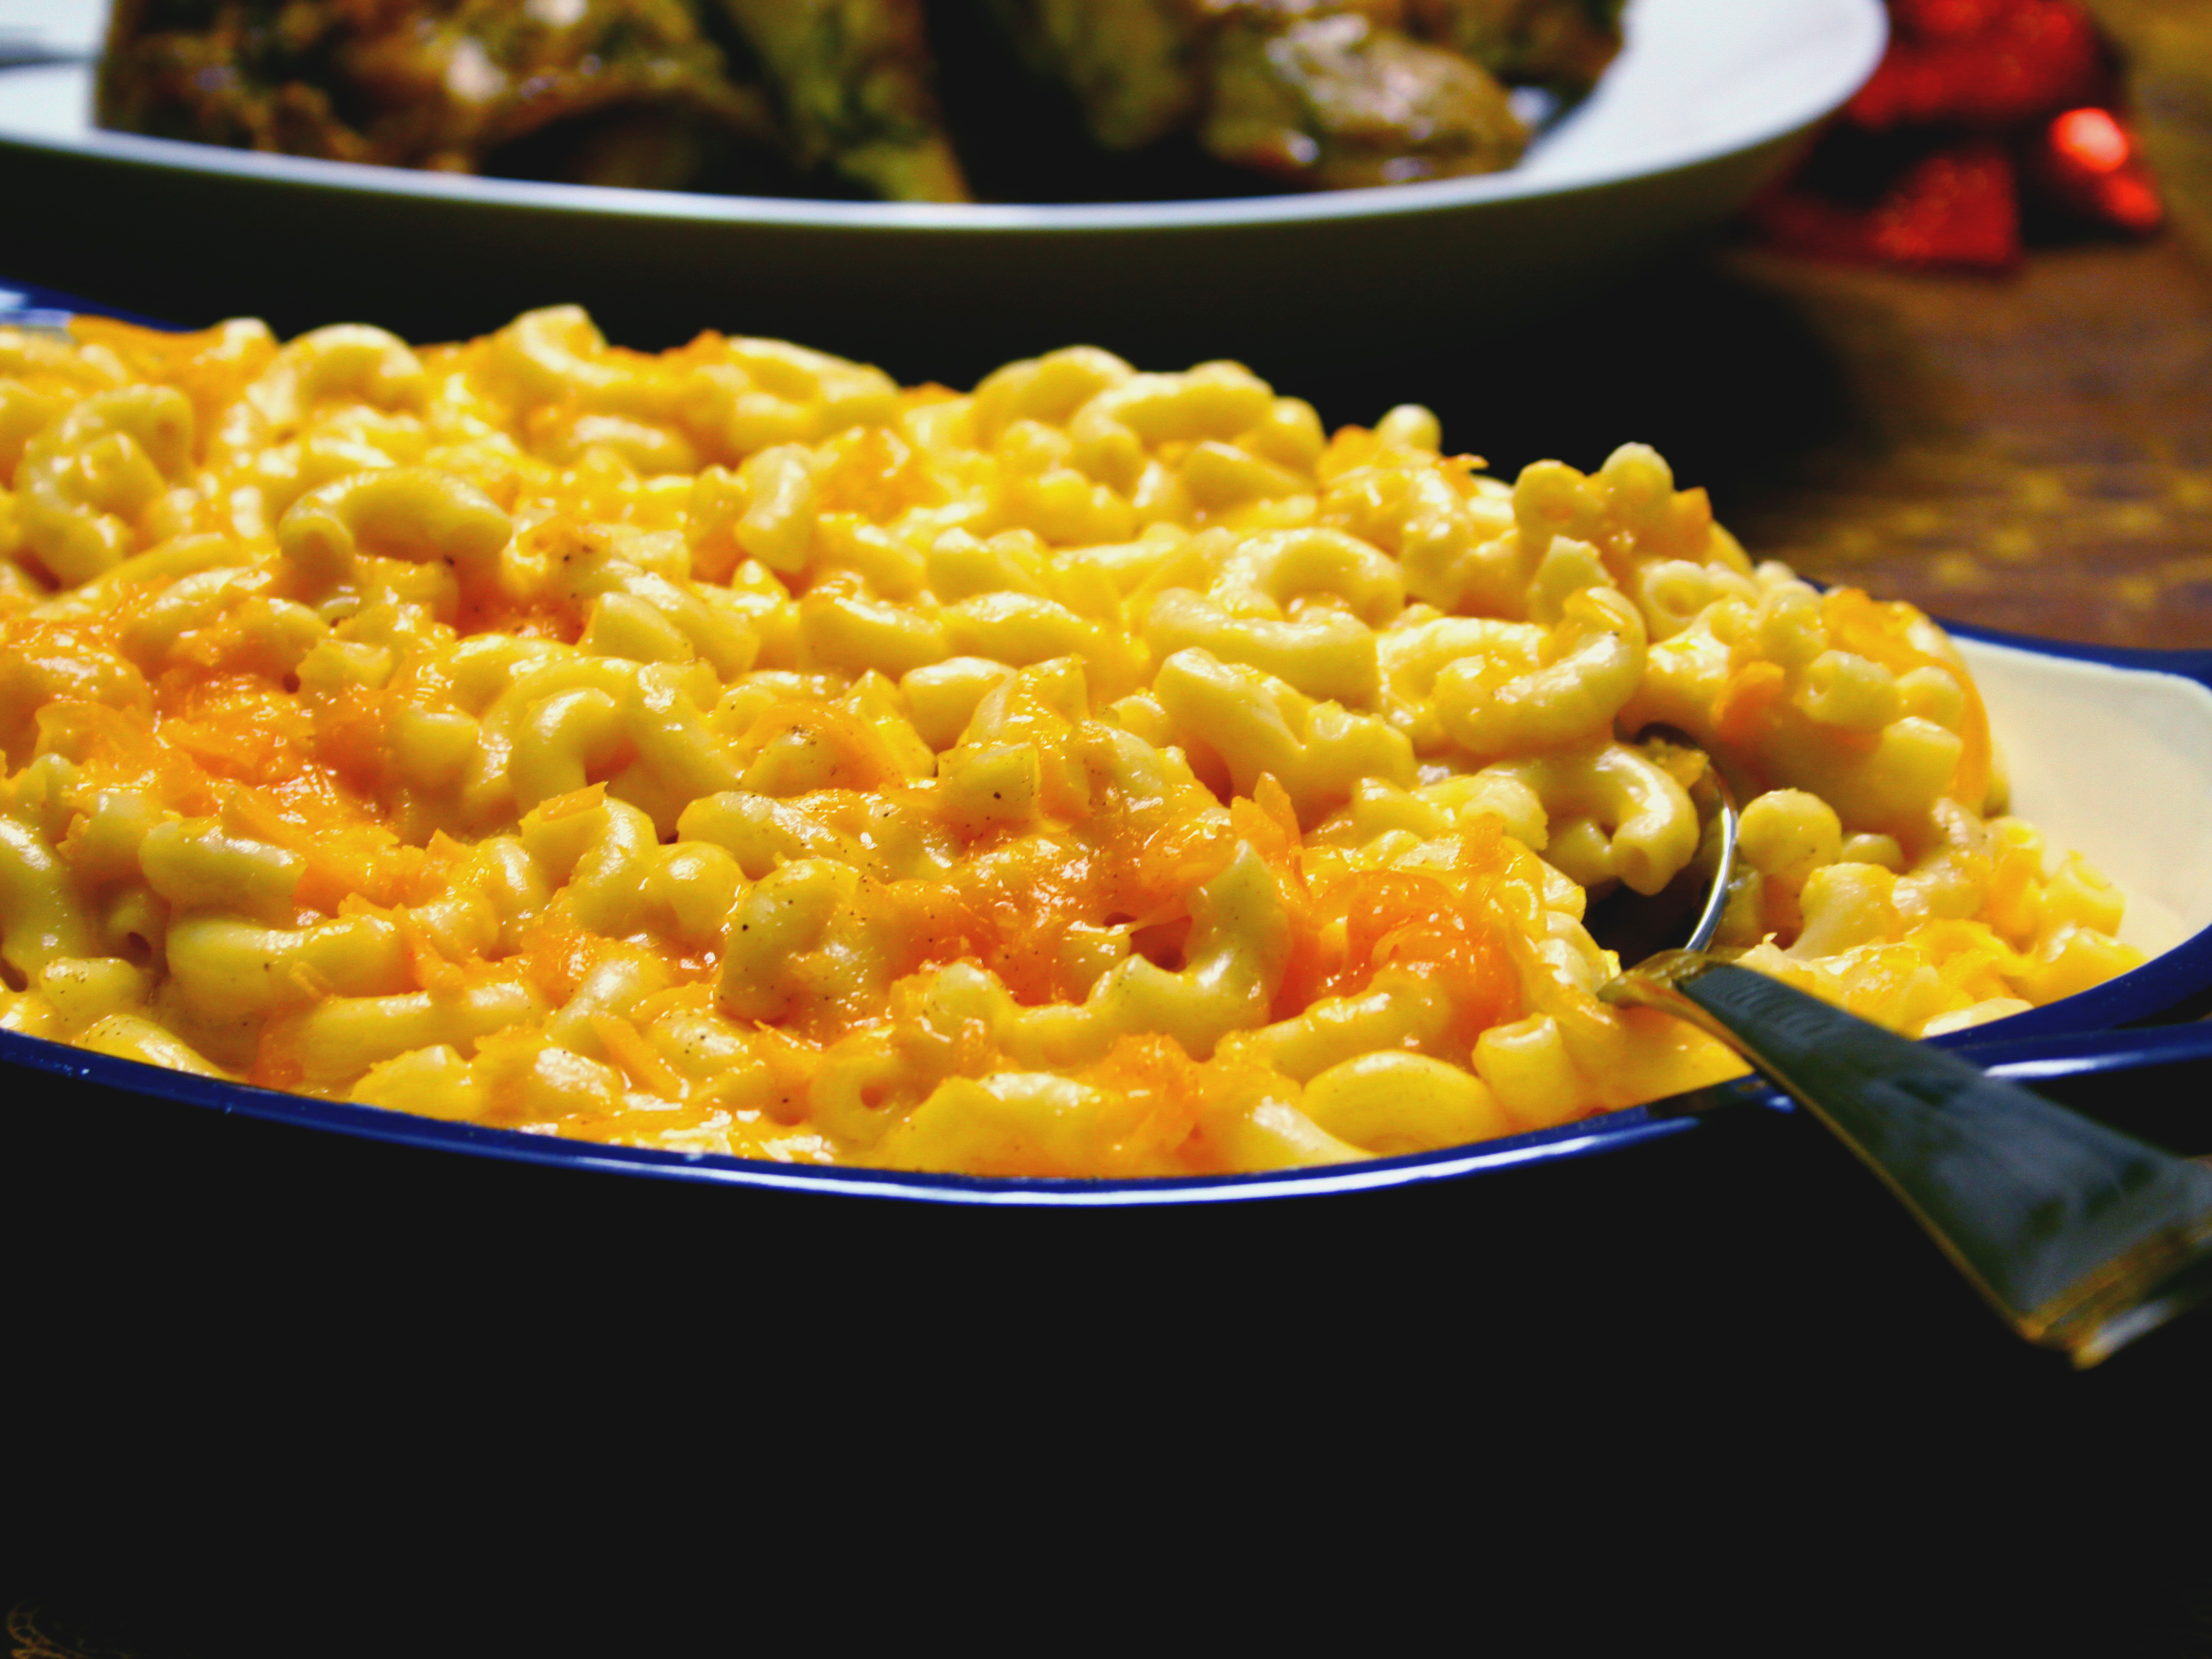 recipe for oven baked macaroni and cheese